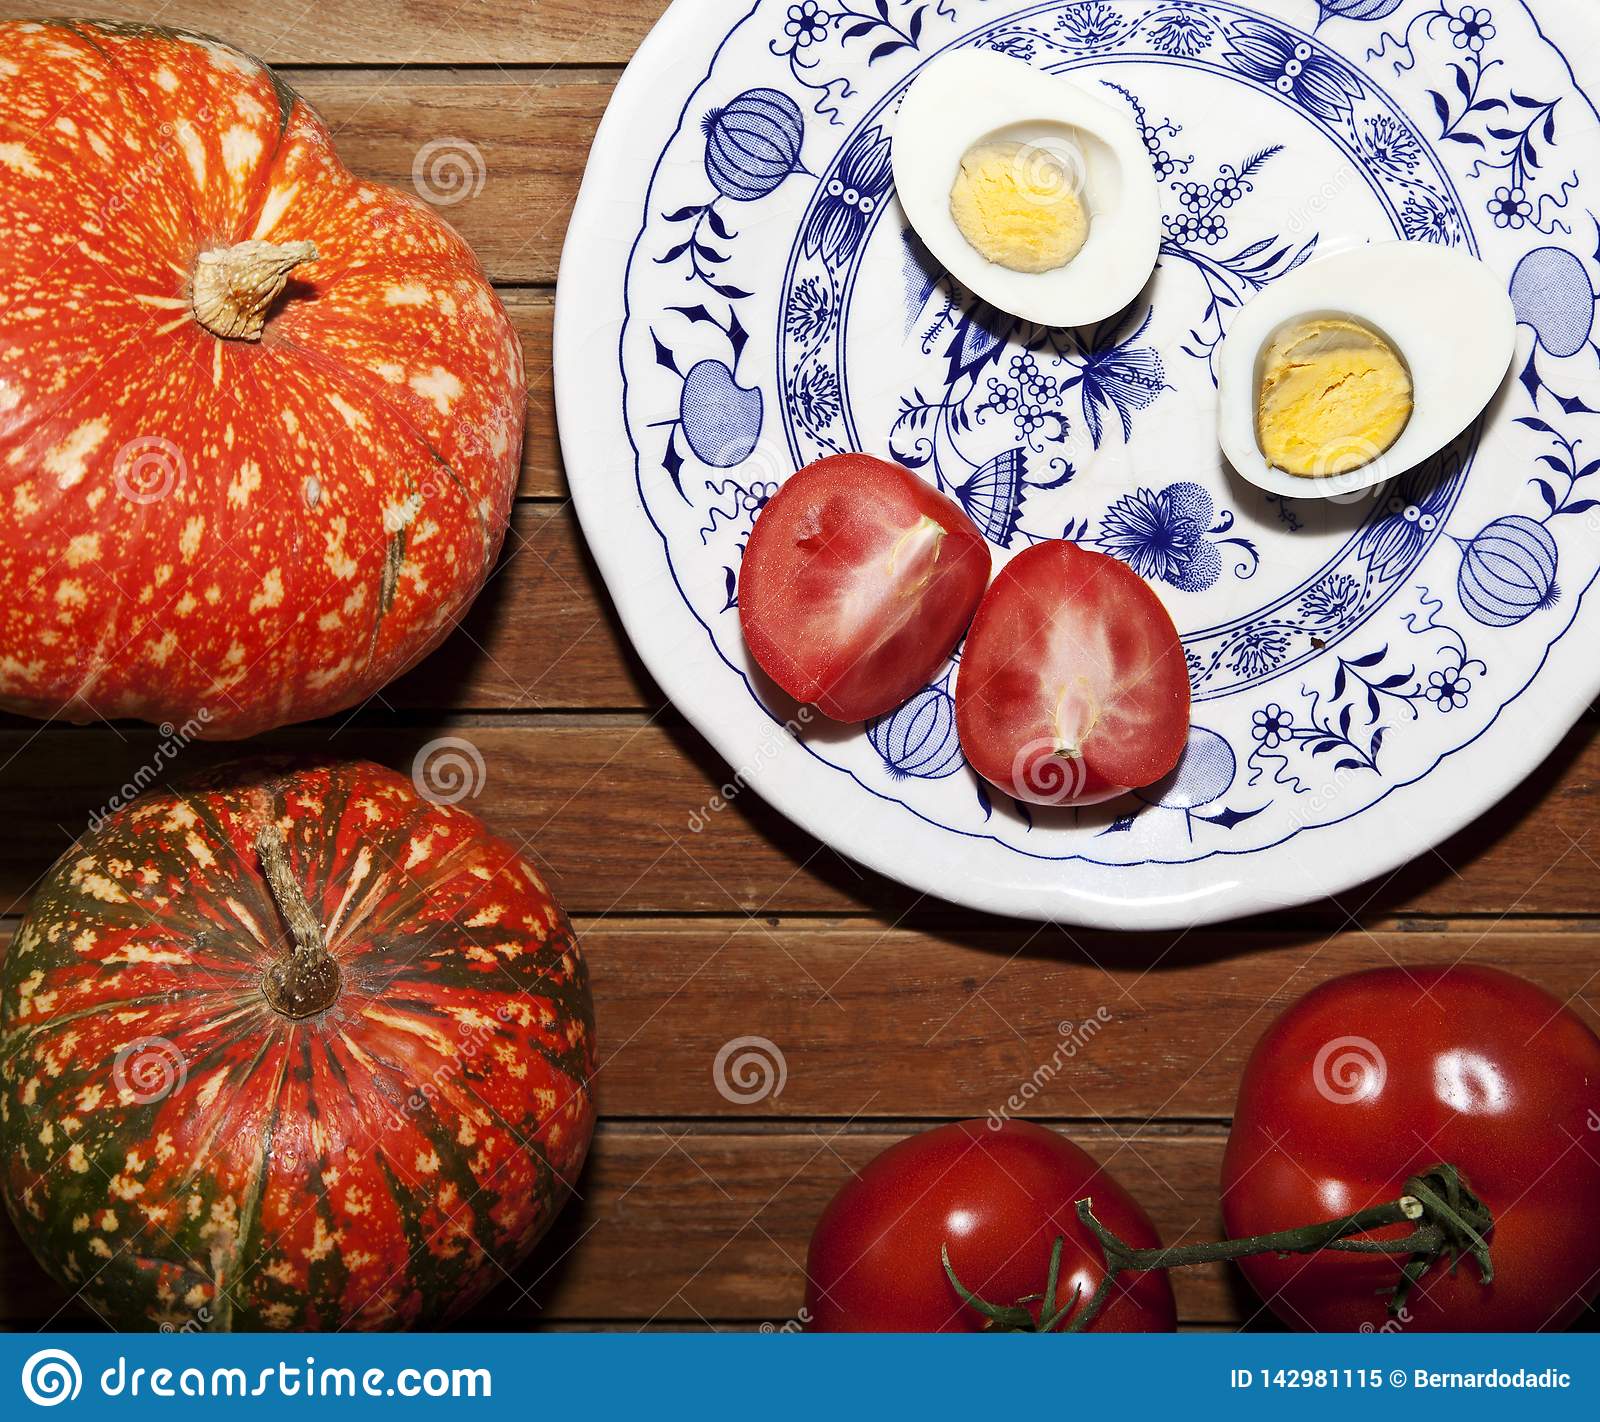 Cooked Egg and Tomato on a Wooden Table Stock Image